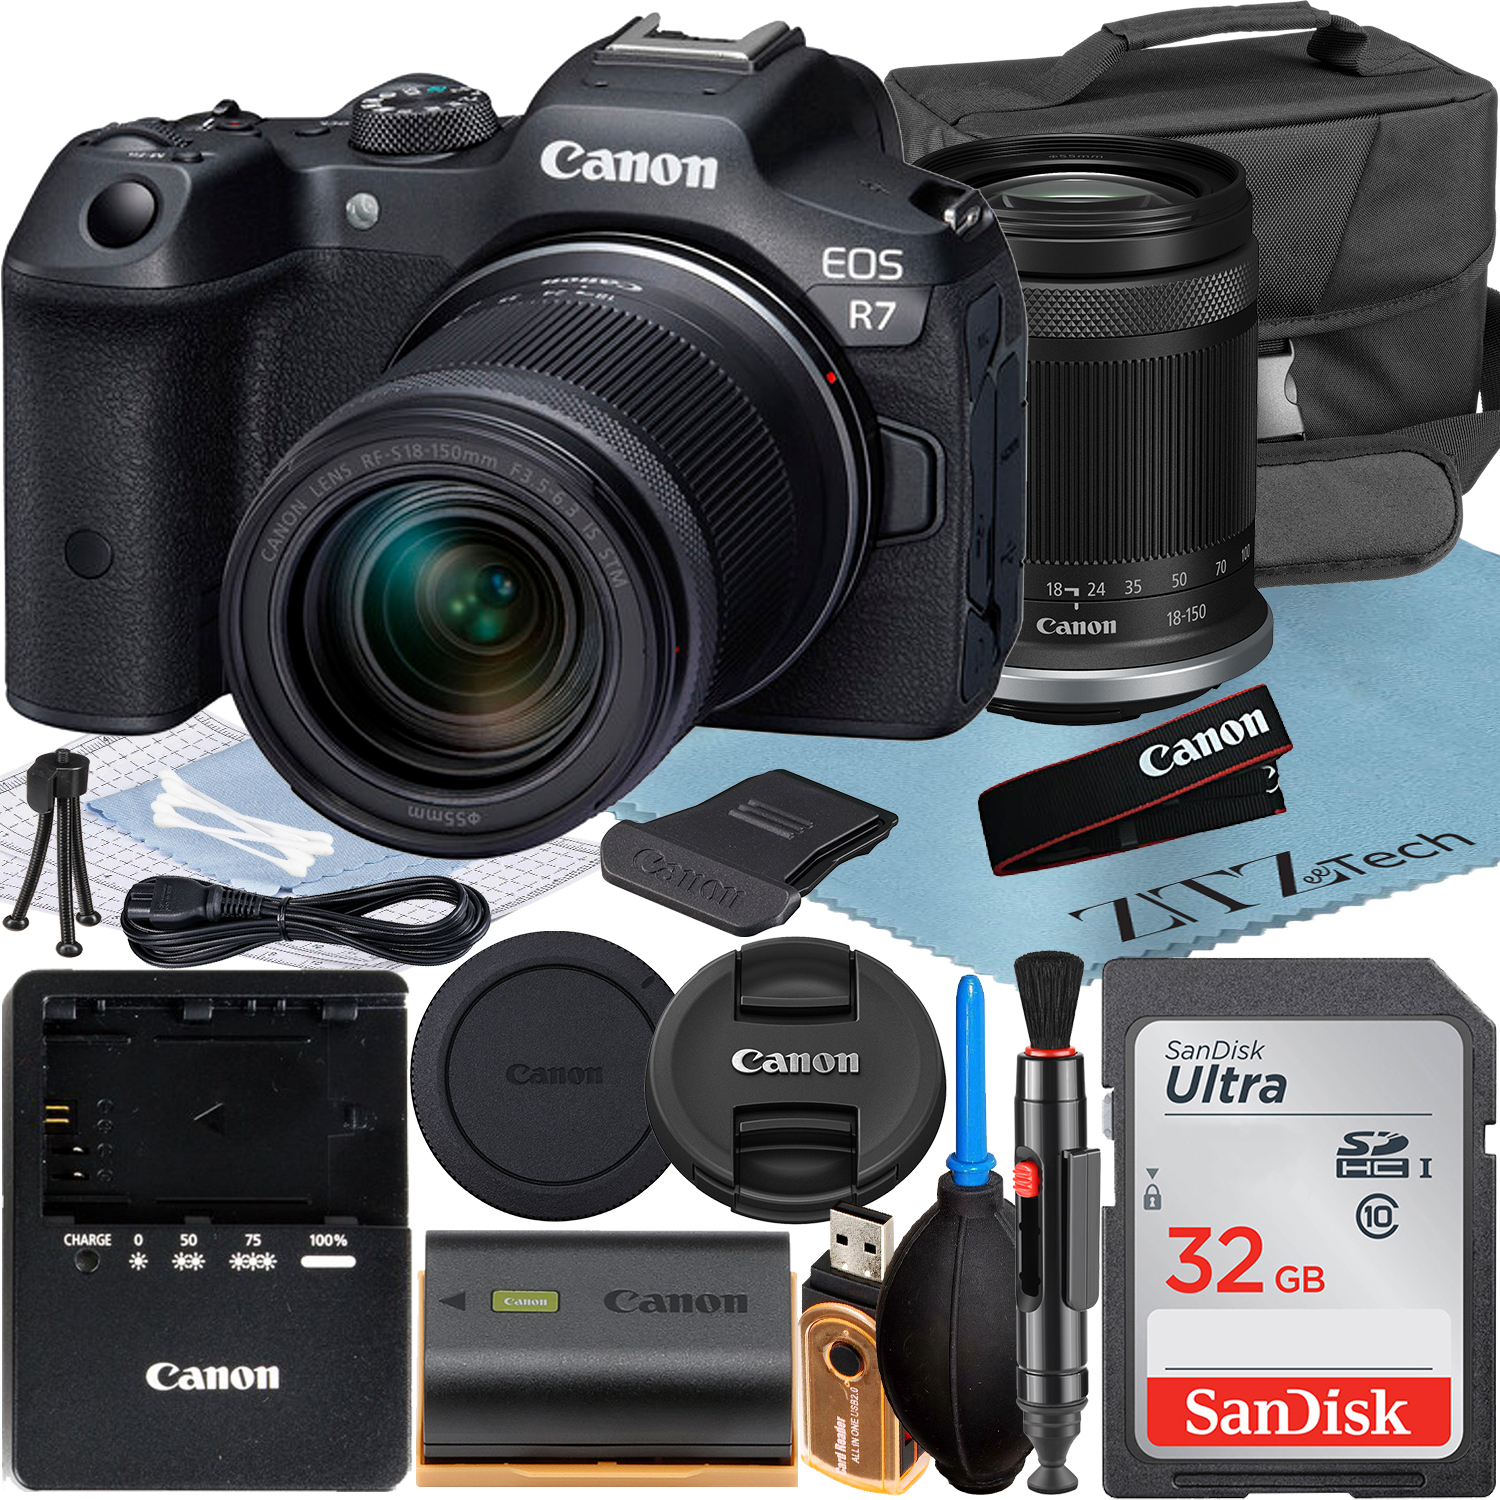 Canon EOS R7 Mirrorless Camera with RF-S 18-150mm Lens + SanDisk 32GB Memory Card + Case + ZeeTech Accessory Bundle